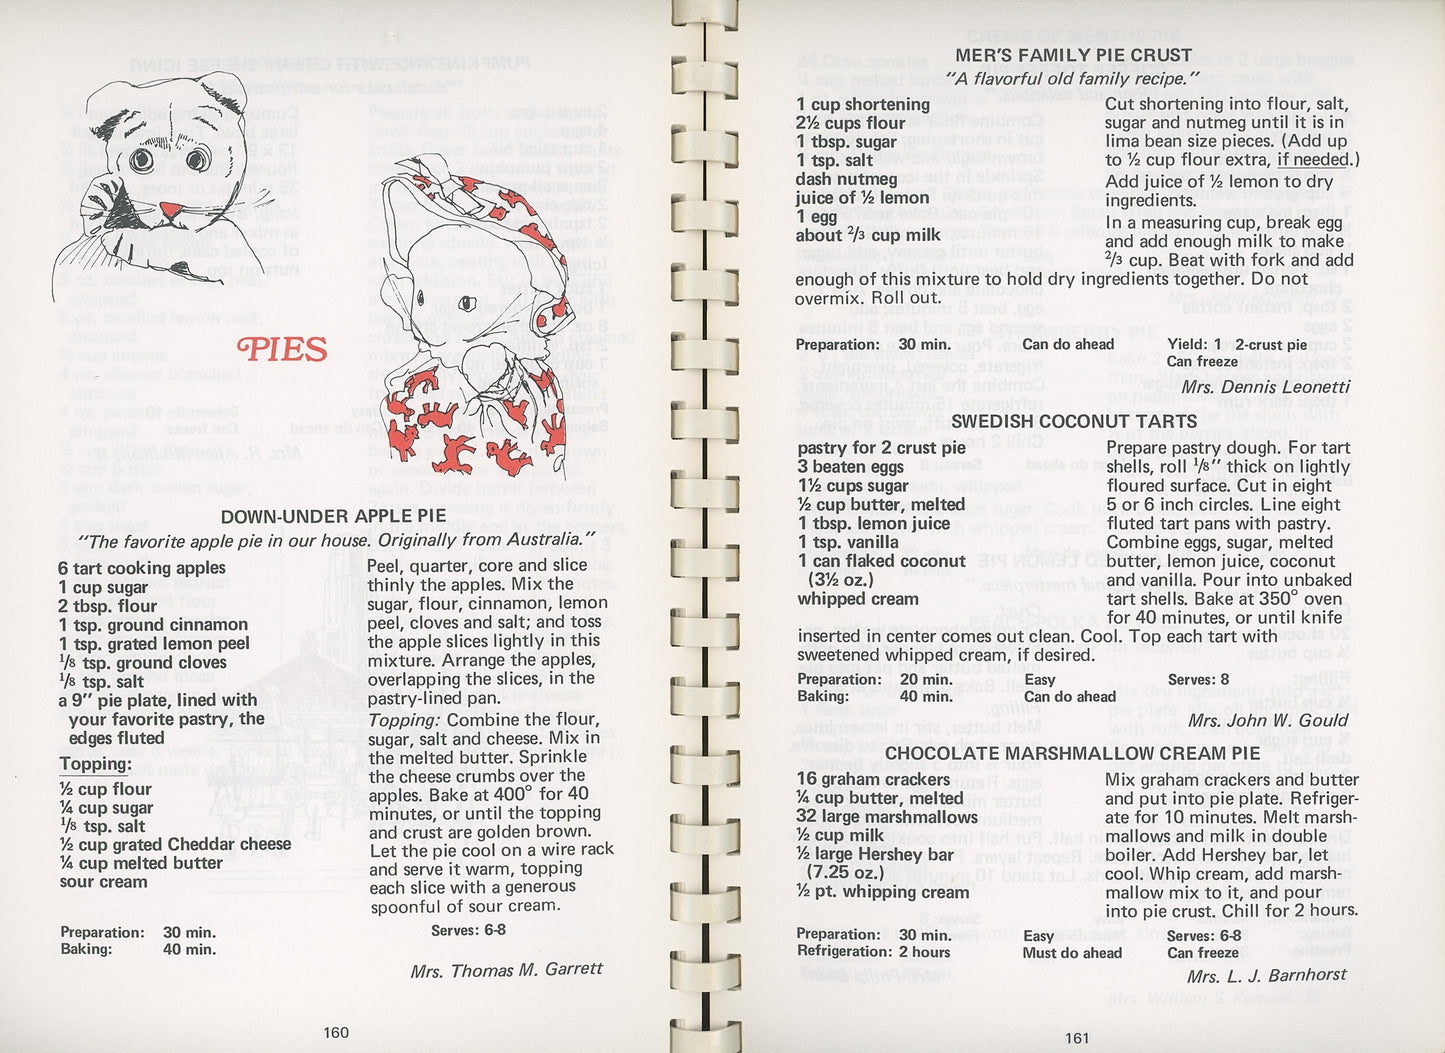 THREE RIVERS COOKBOOK I: The Good Taste of Pittsburgh Published 1973